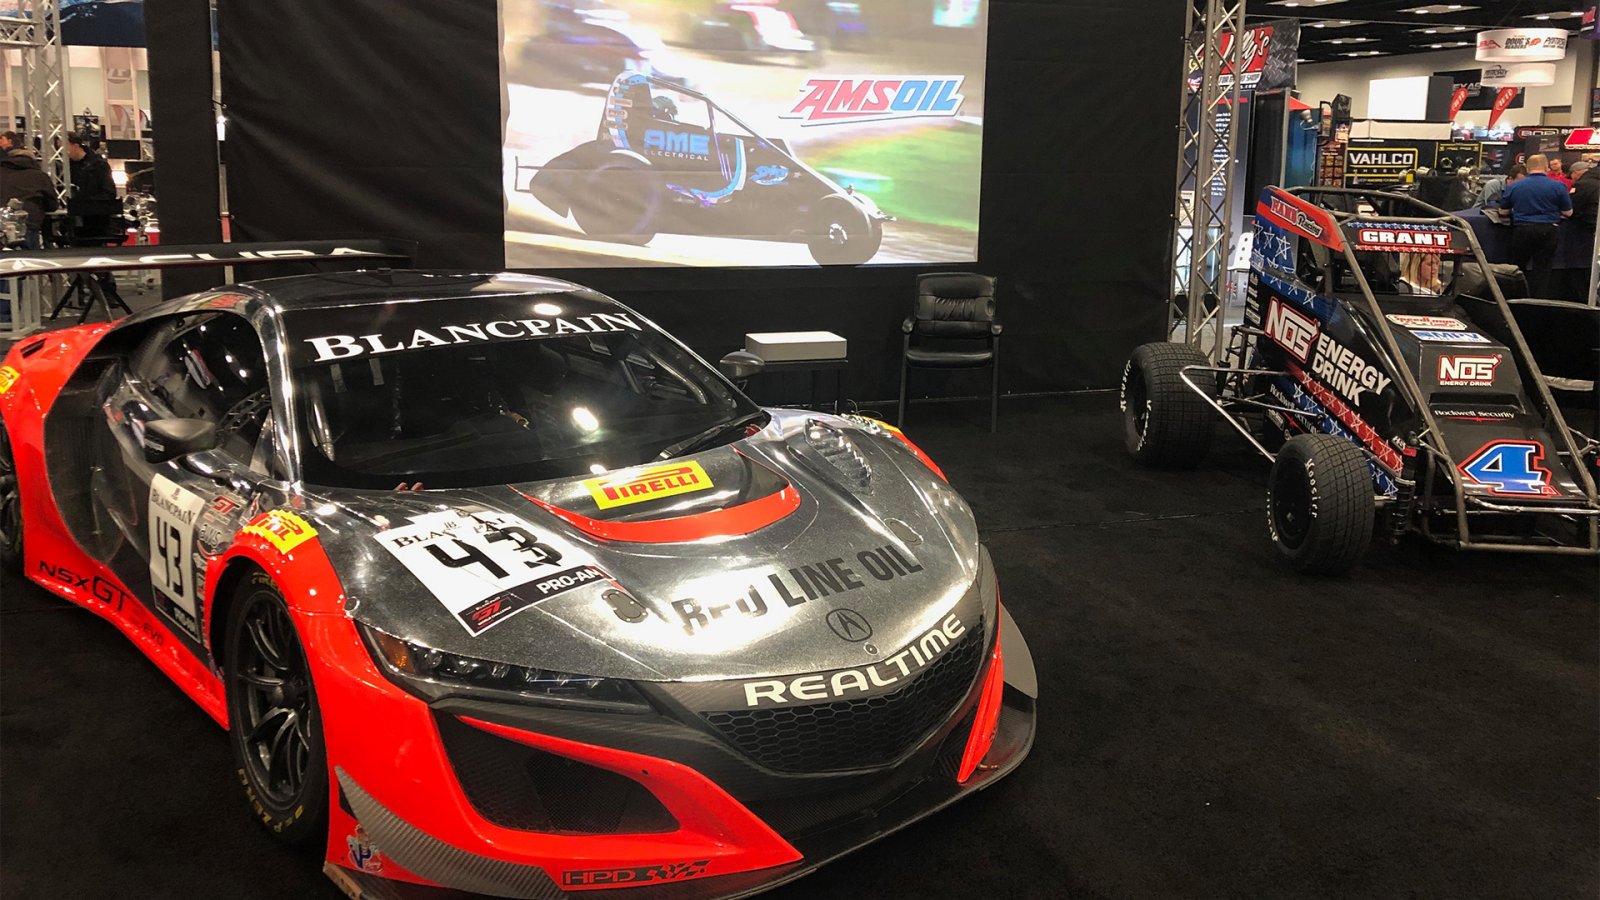 SRO America Delivers State of the Series Presentation at Performance Racing Industry Show